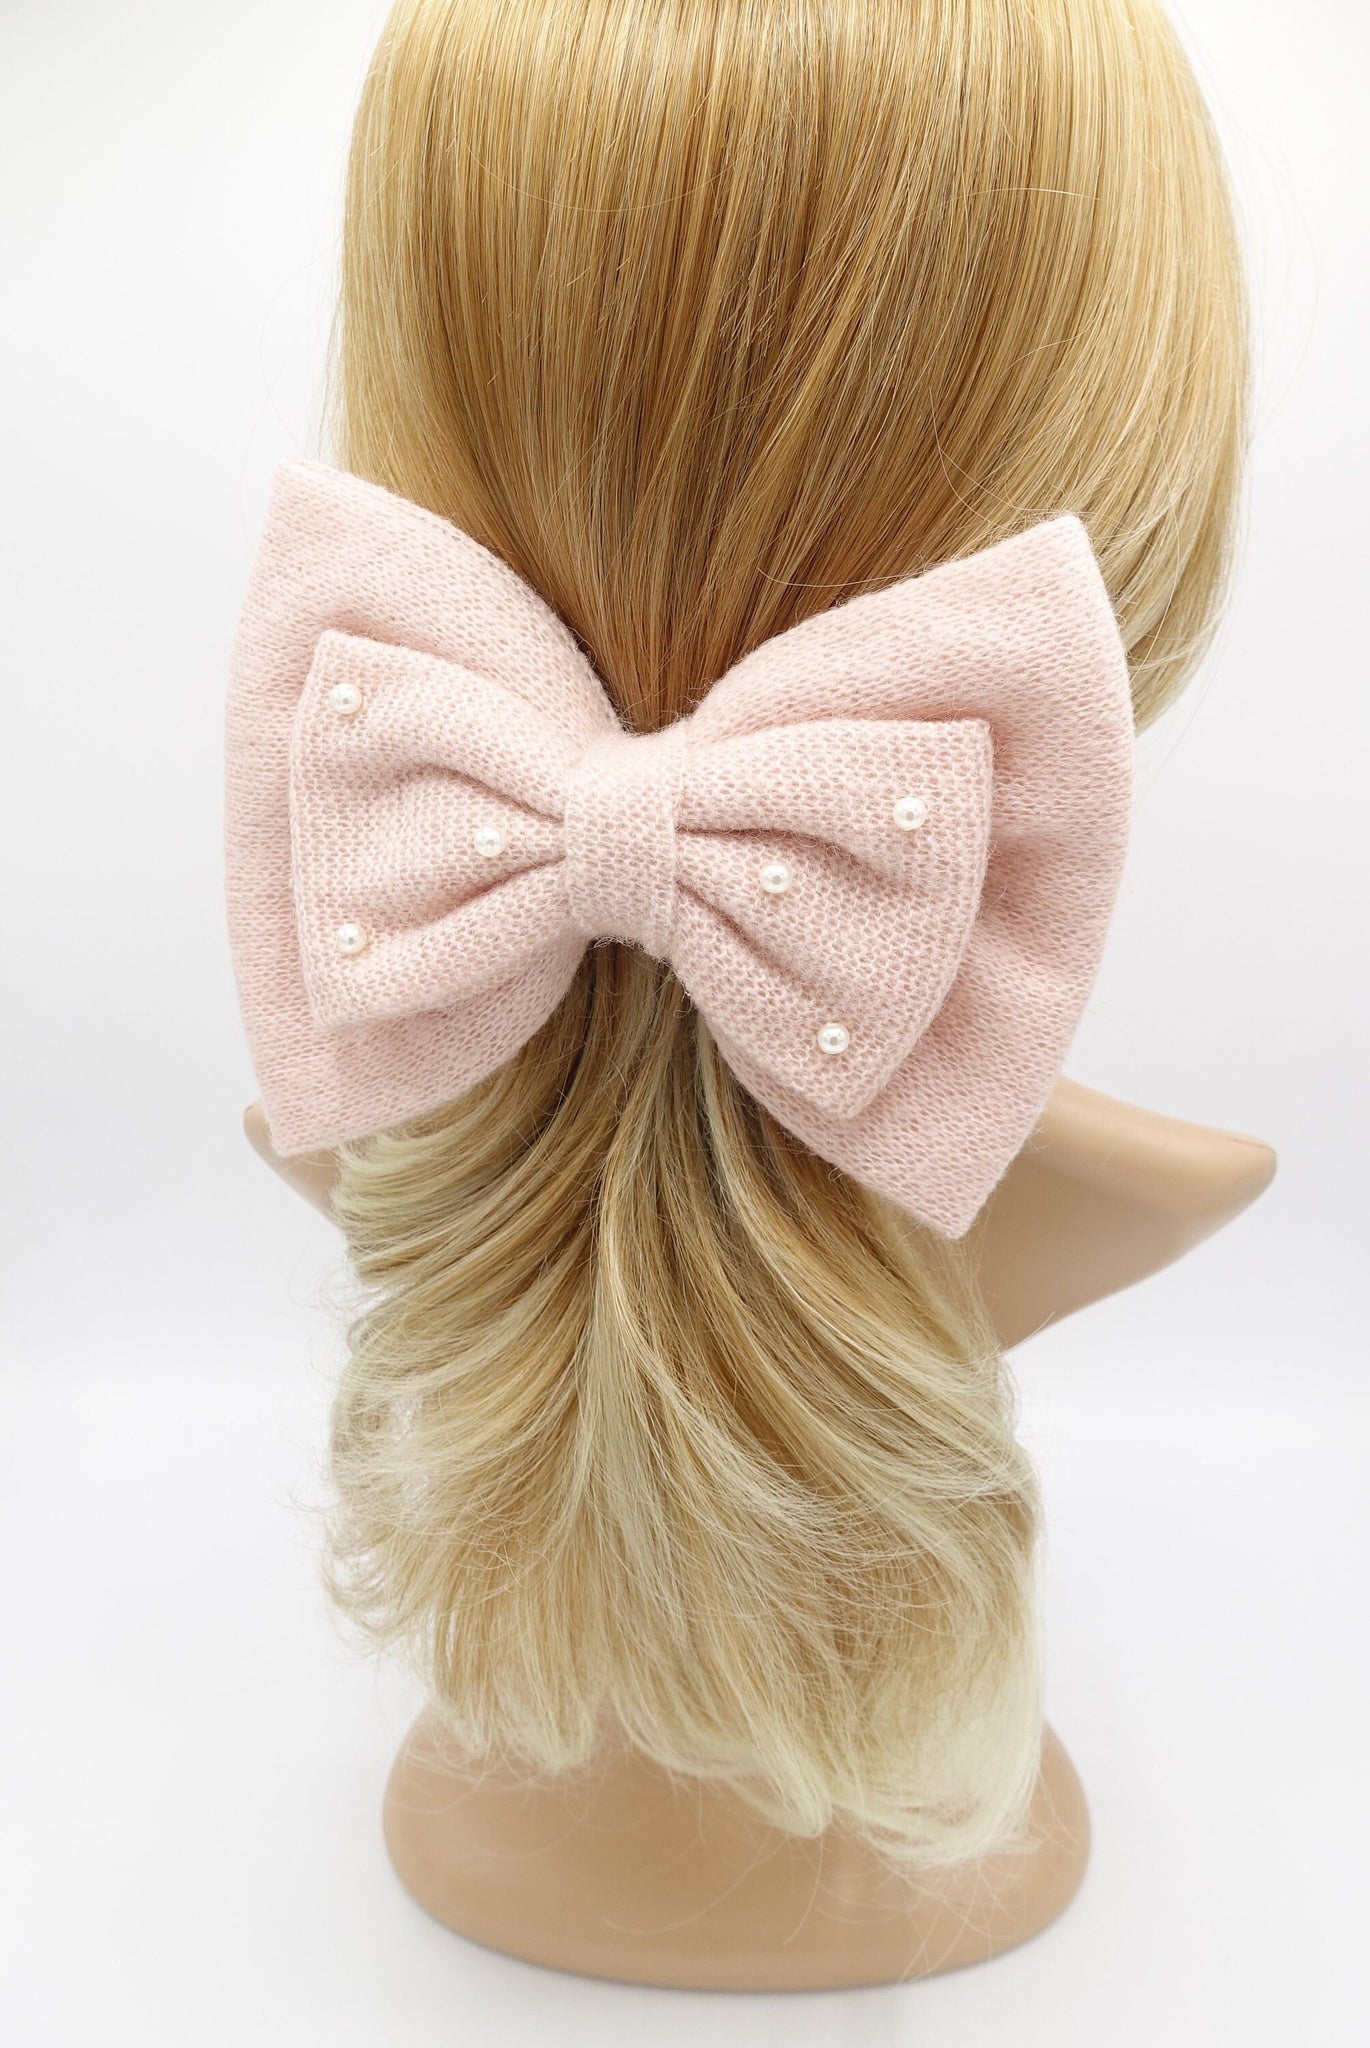 VeryShine woolen hair bow large pearl hair bow for women